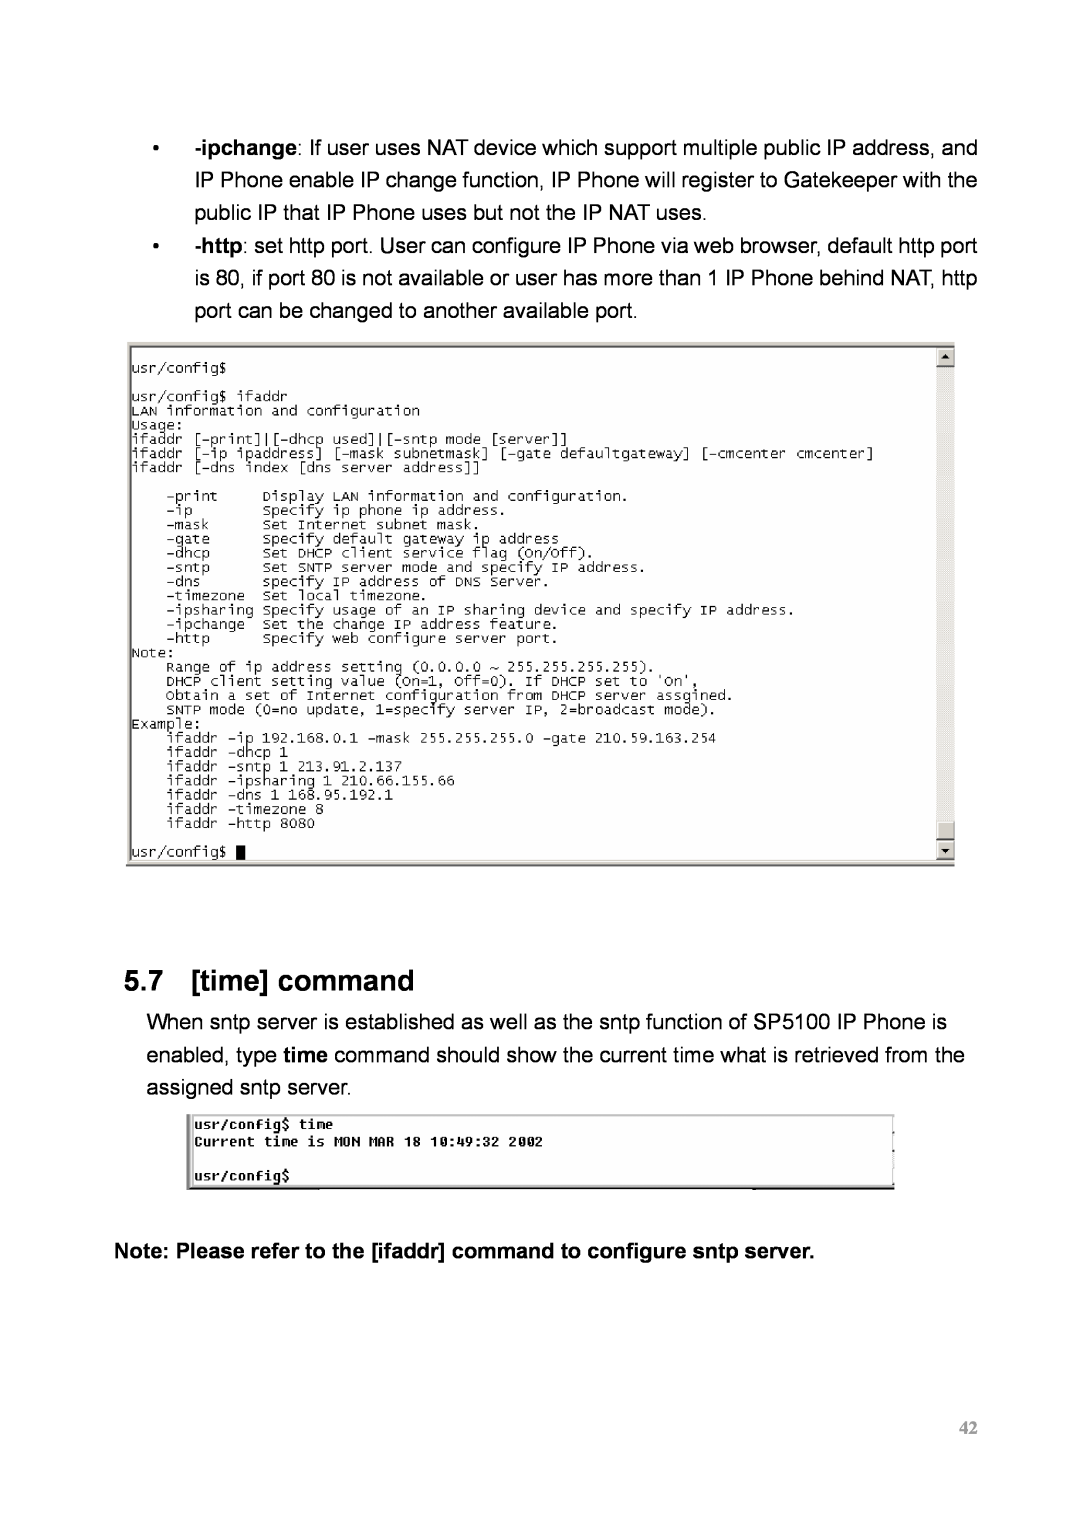 MicroNet Technology SP5100 user manual time command, Note Please refer to the ifaddr command to configure sntp server 